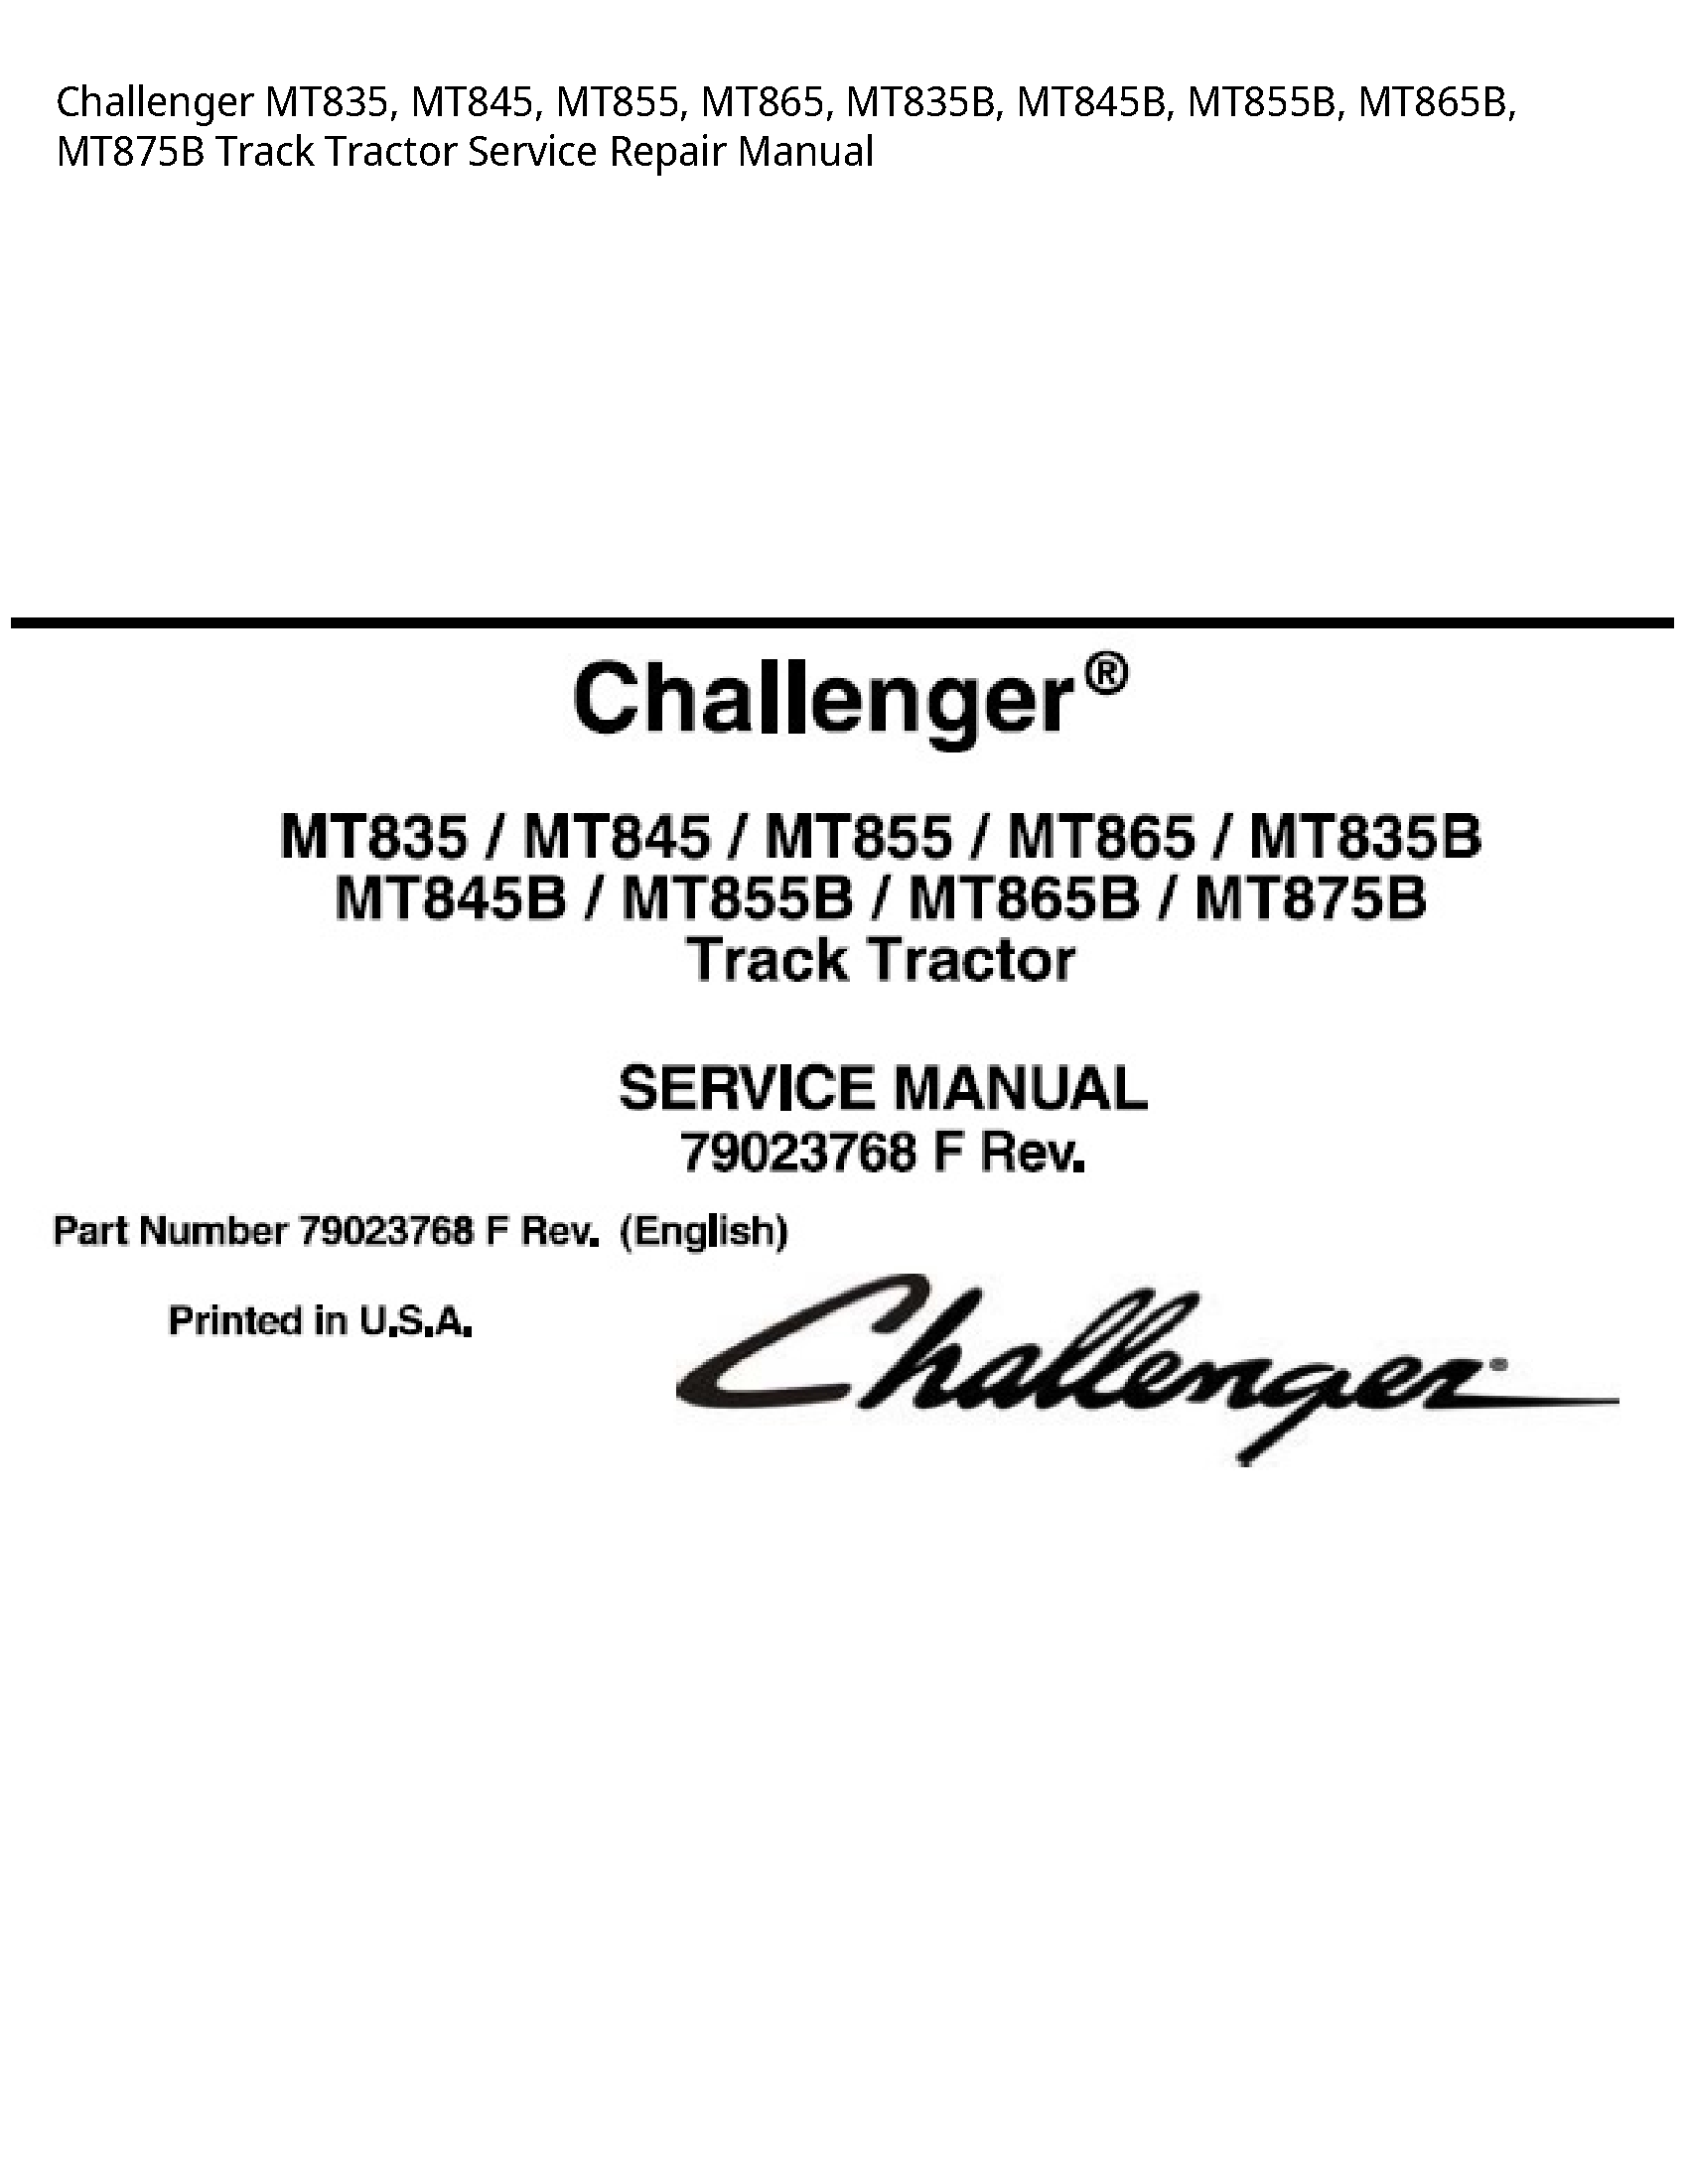 Challenger MT835 Track Tractor manual